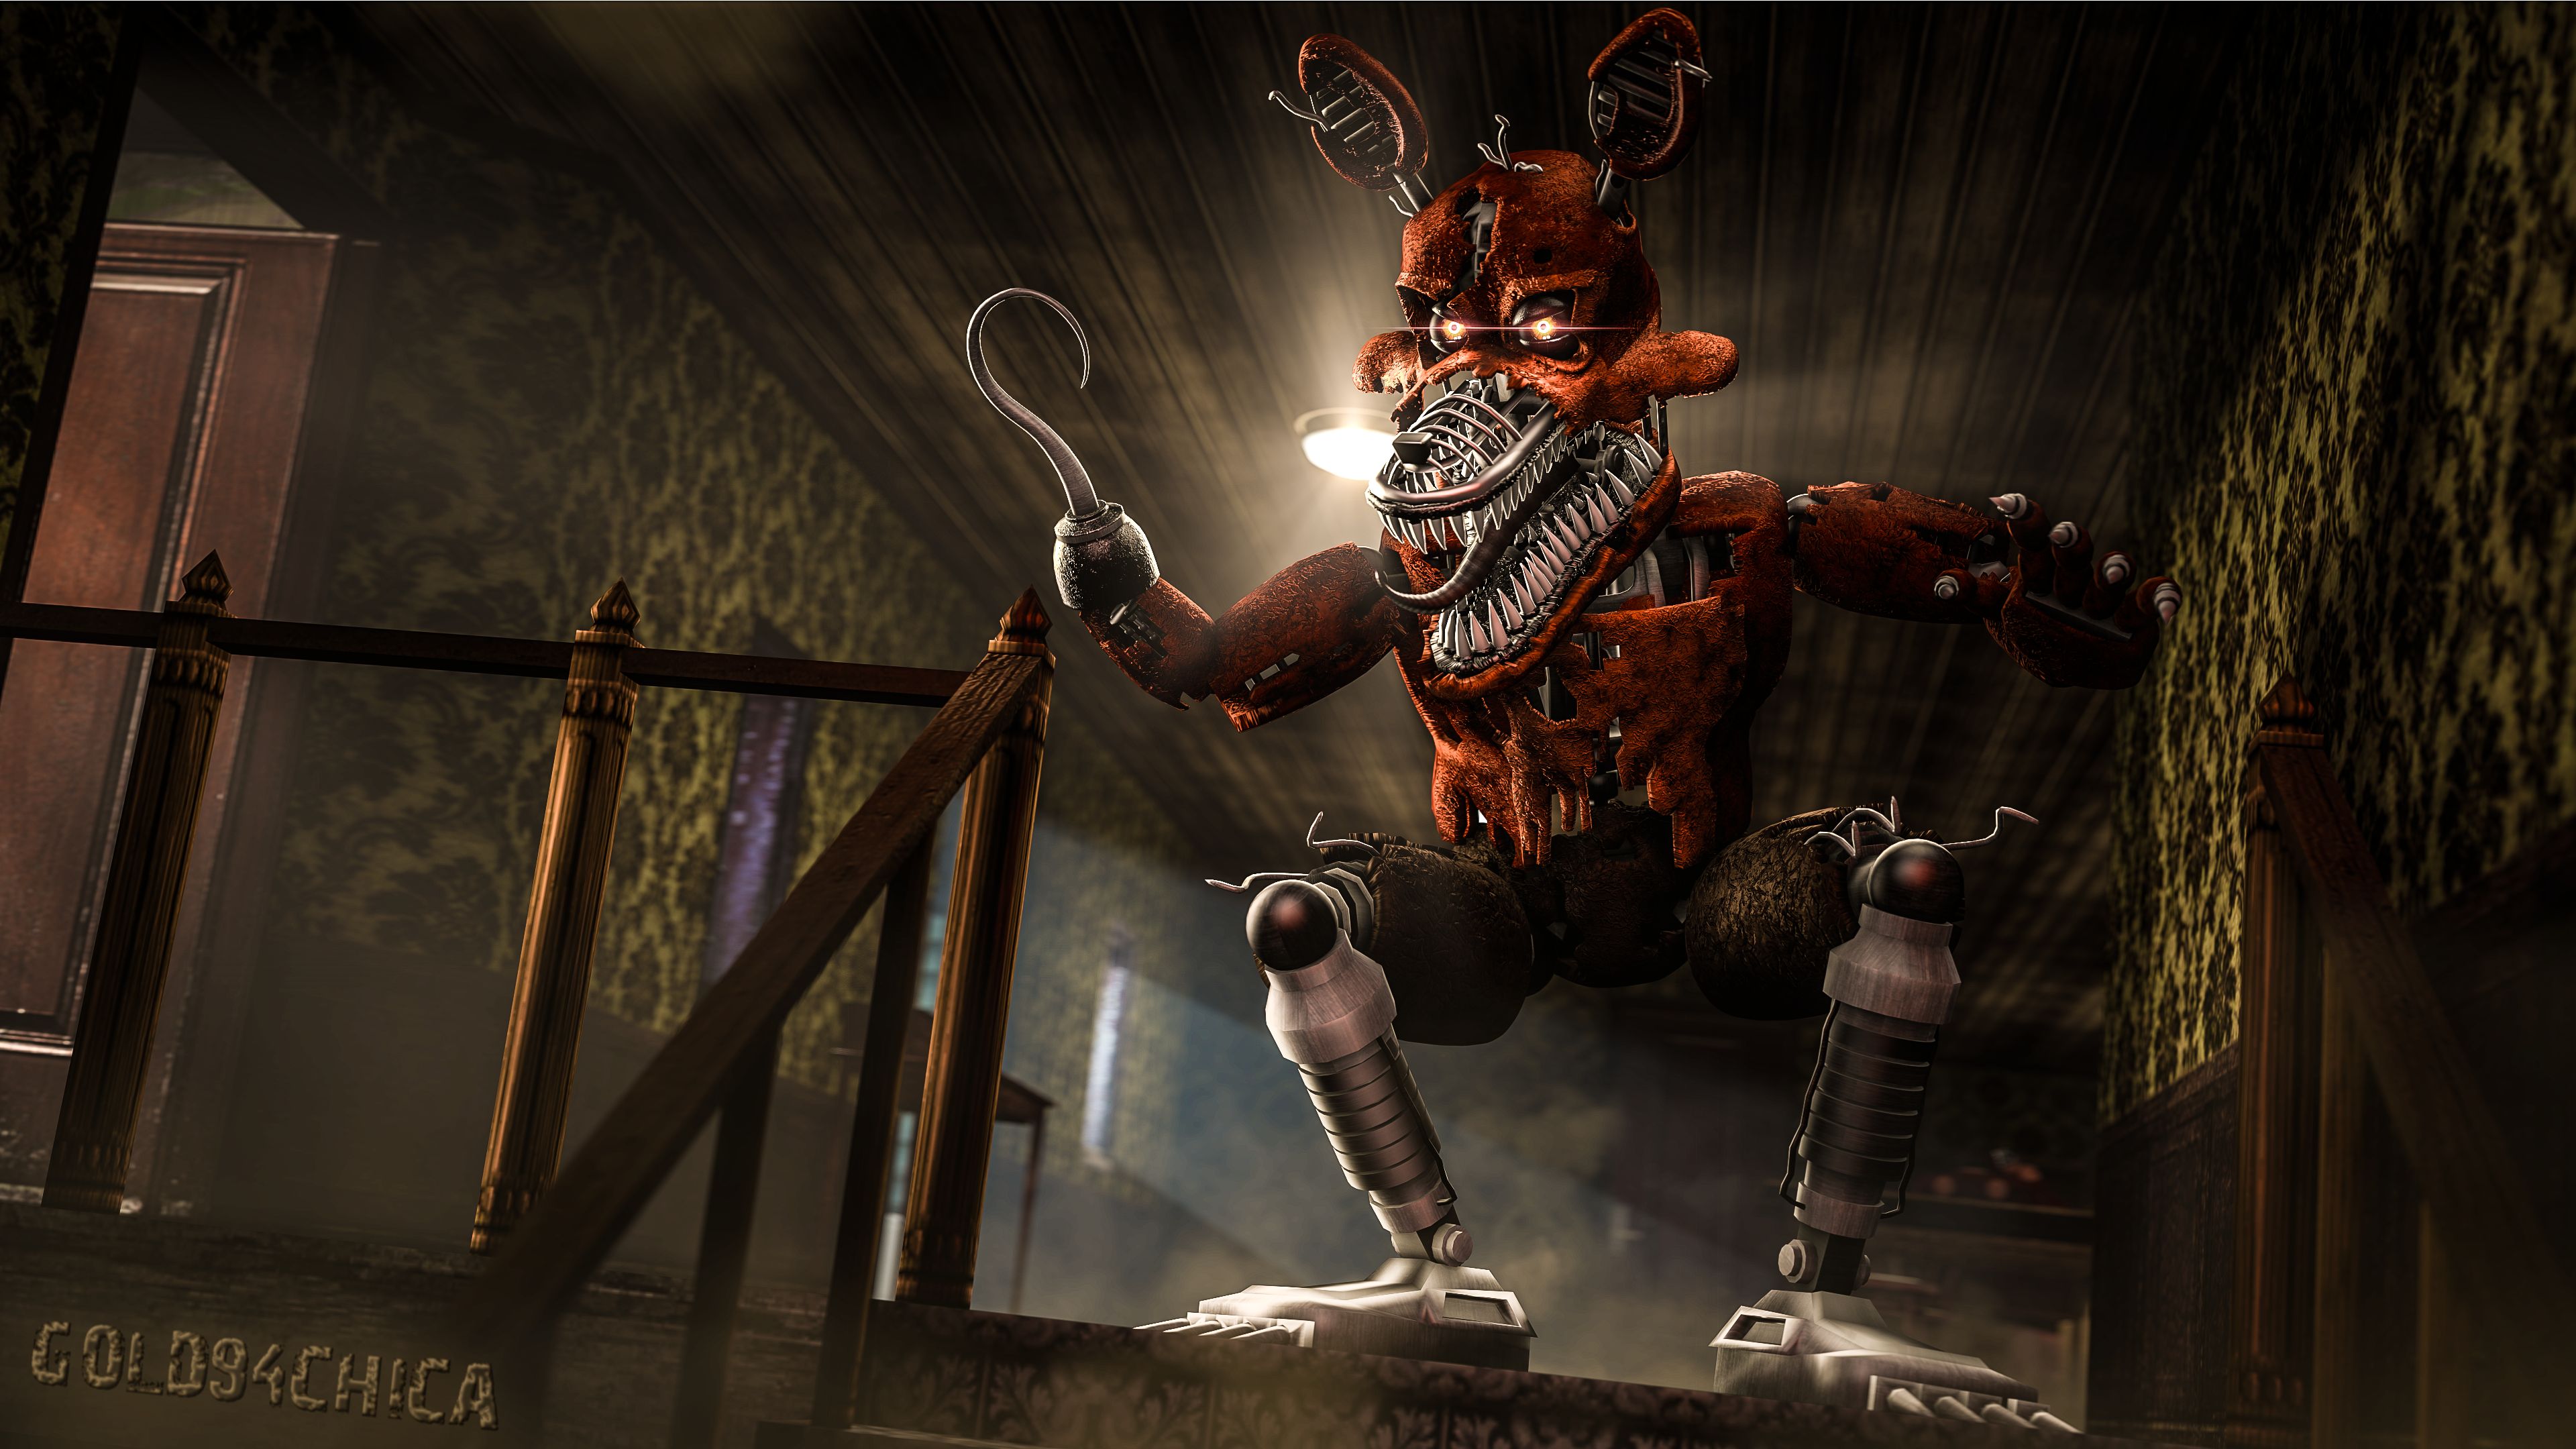 Download Five Nights At Freddy's 4 wallpapers for mobile phone